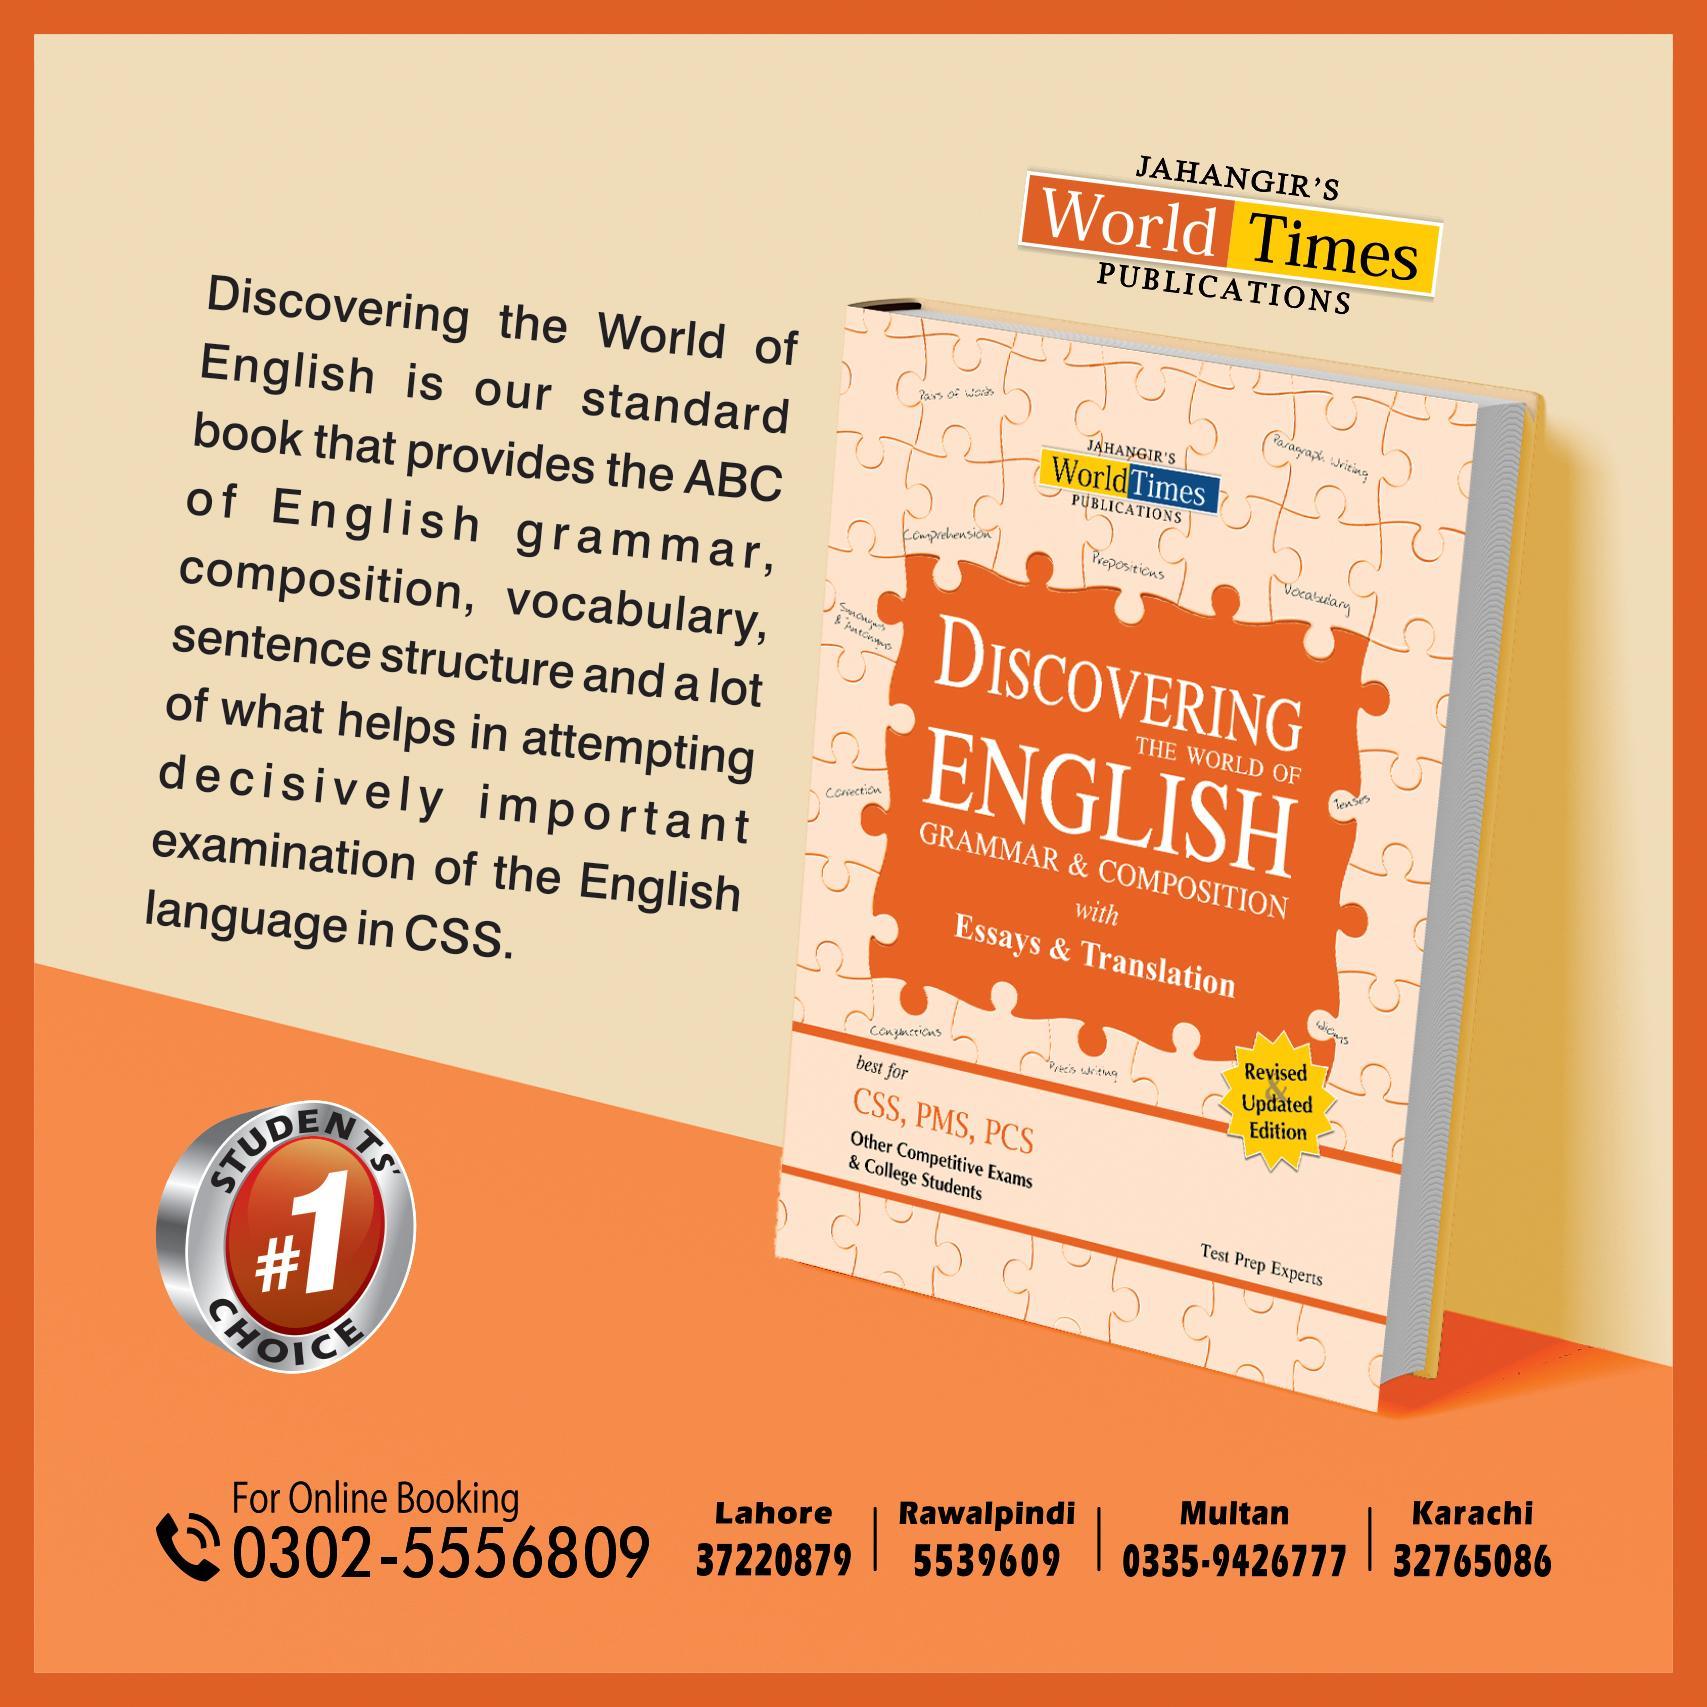 You are currently viewing Discovering The World of English (17-02-23)